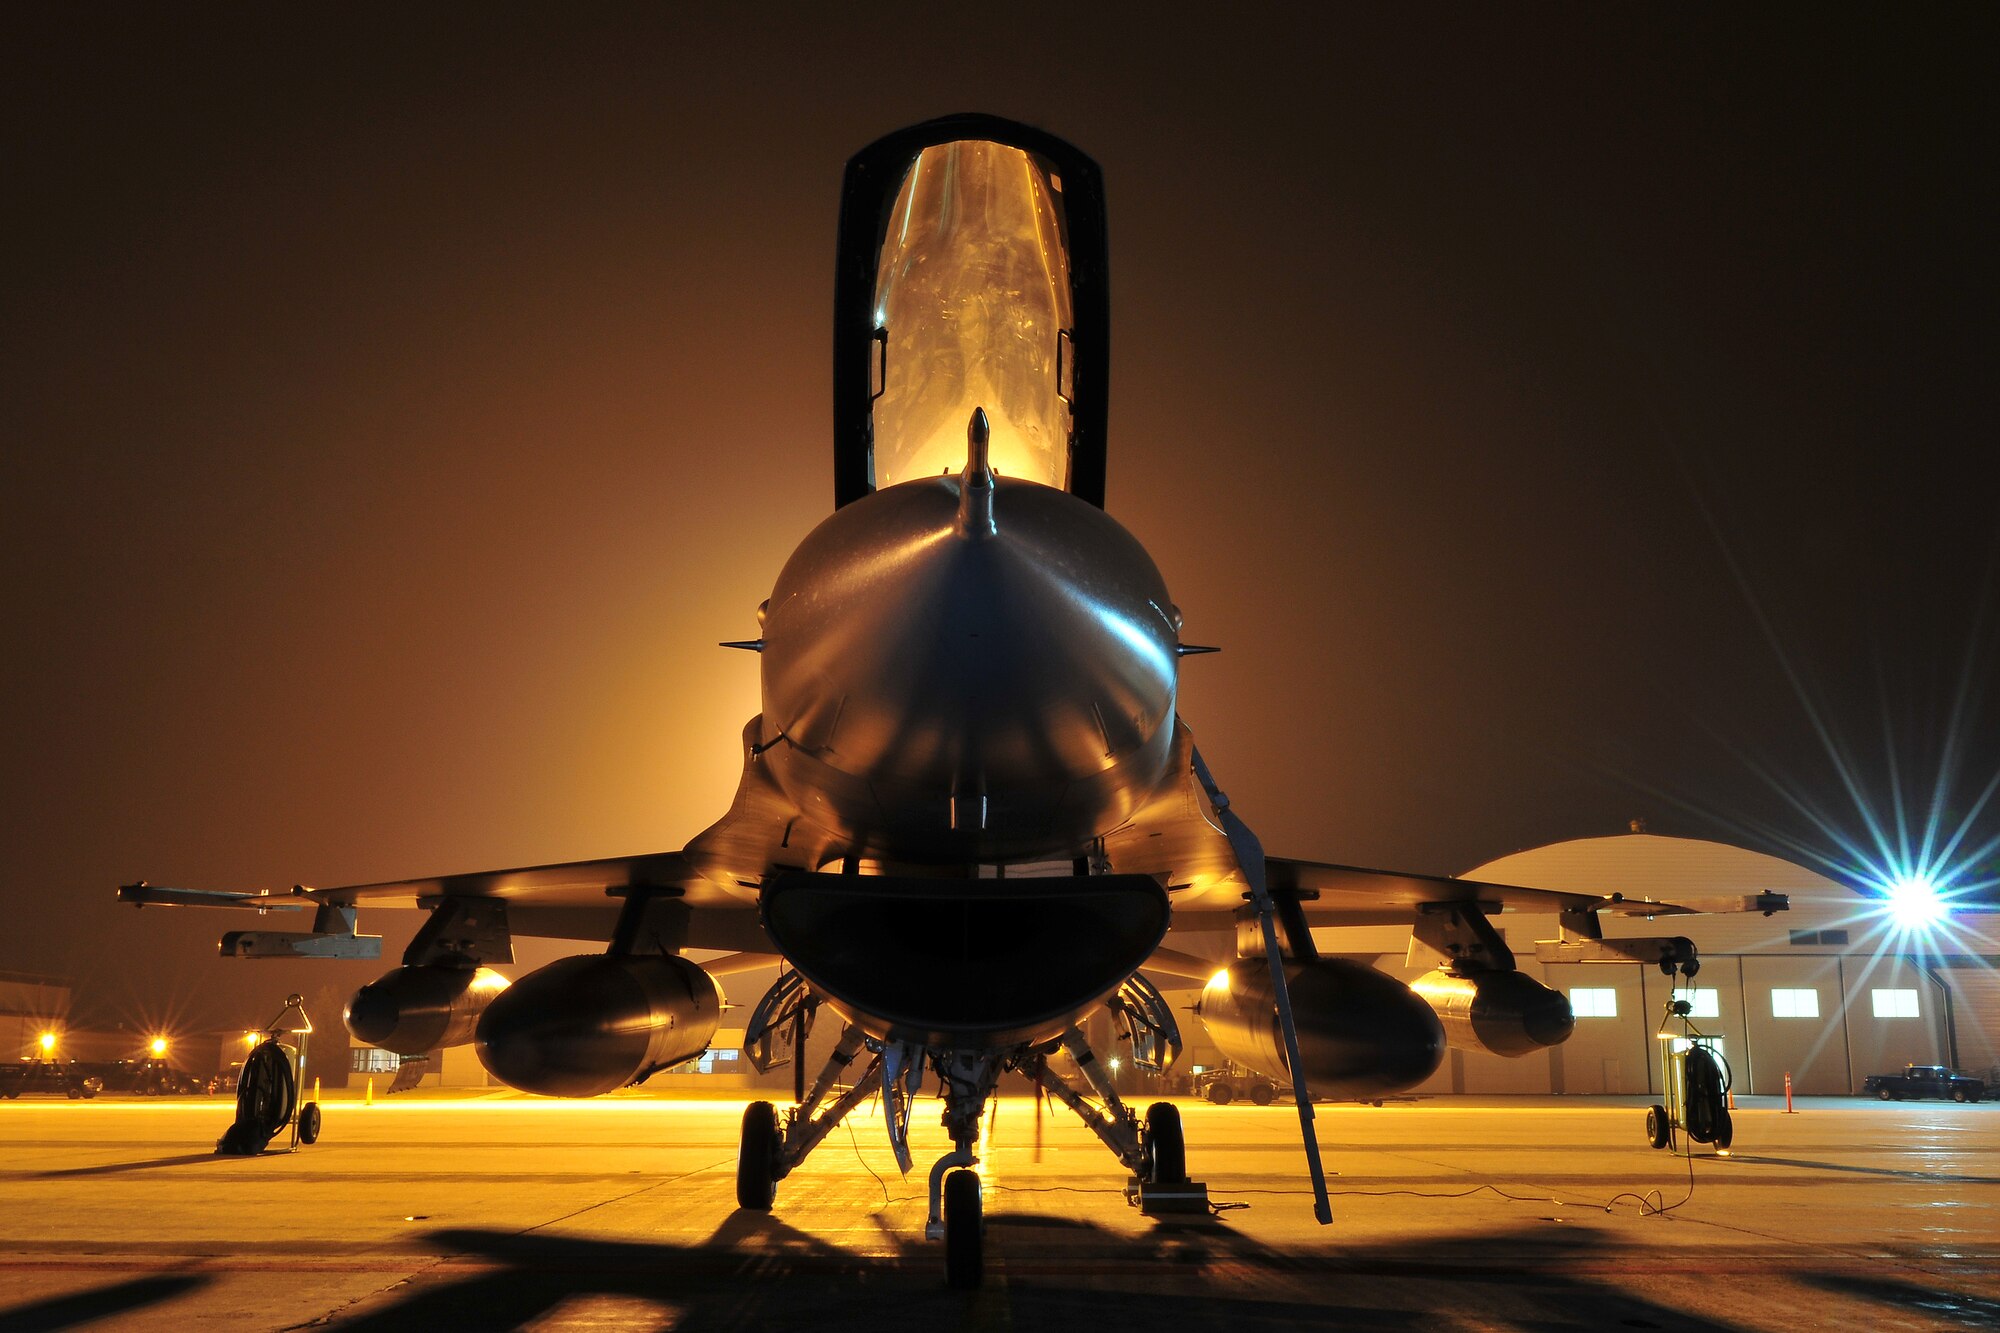 An F-16 fighter jet stands ready for departure at Truax Field in Madison, Wis. early on the morning of  September 22, 2009. The 115th Fighter Wing launched 14 F-16s early Tuesday morning as part of the wings scheduled Aerospace Expeditionary Force rotation that began last week when approximately 200 of the unit's members deployed in support of Operation Iraqi Freedom. (US Air Force photo by Master Sgt. Paul Gorman)